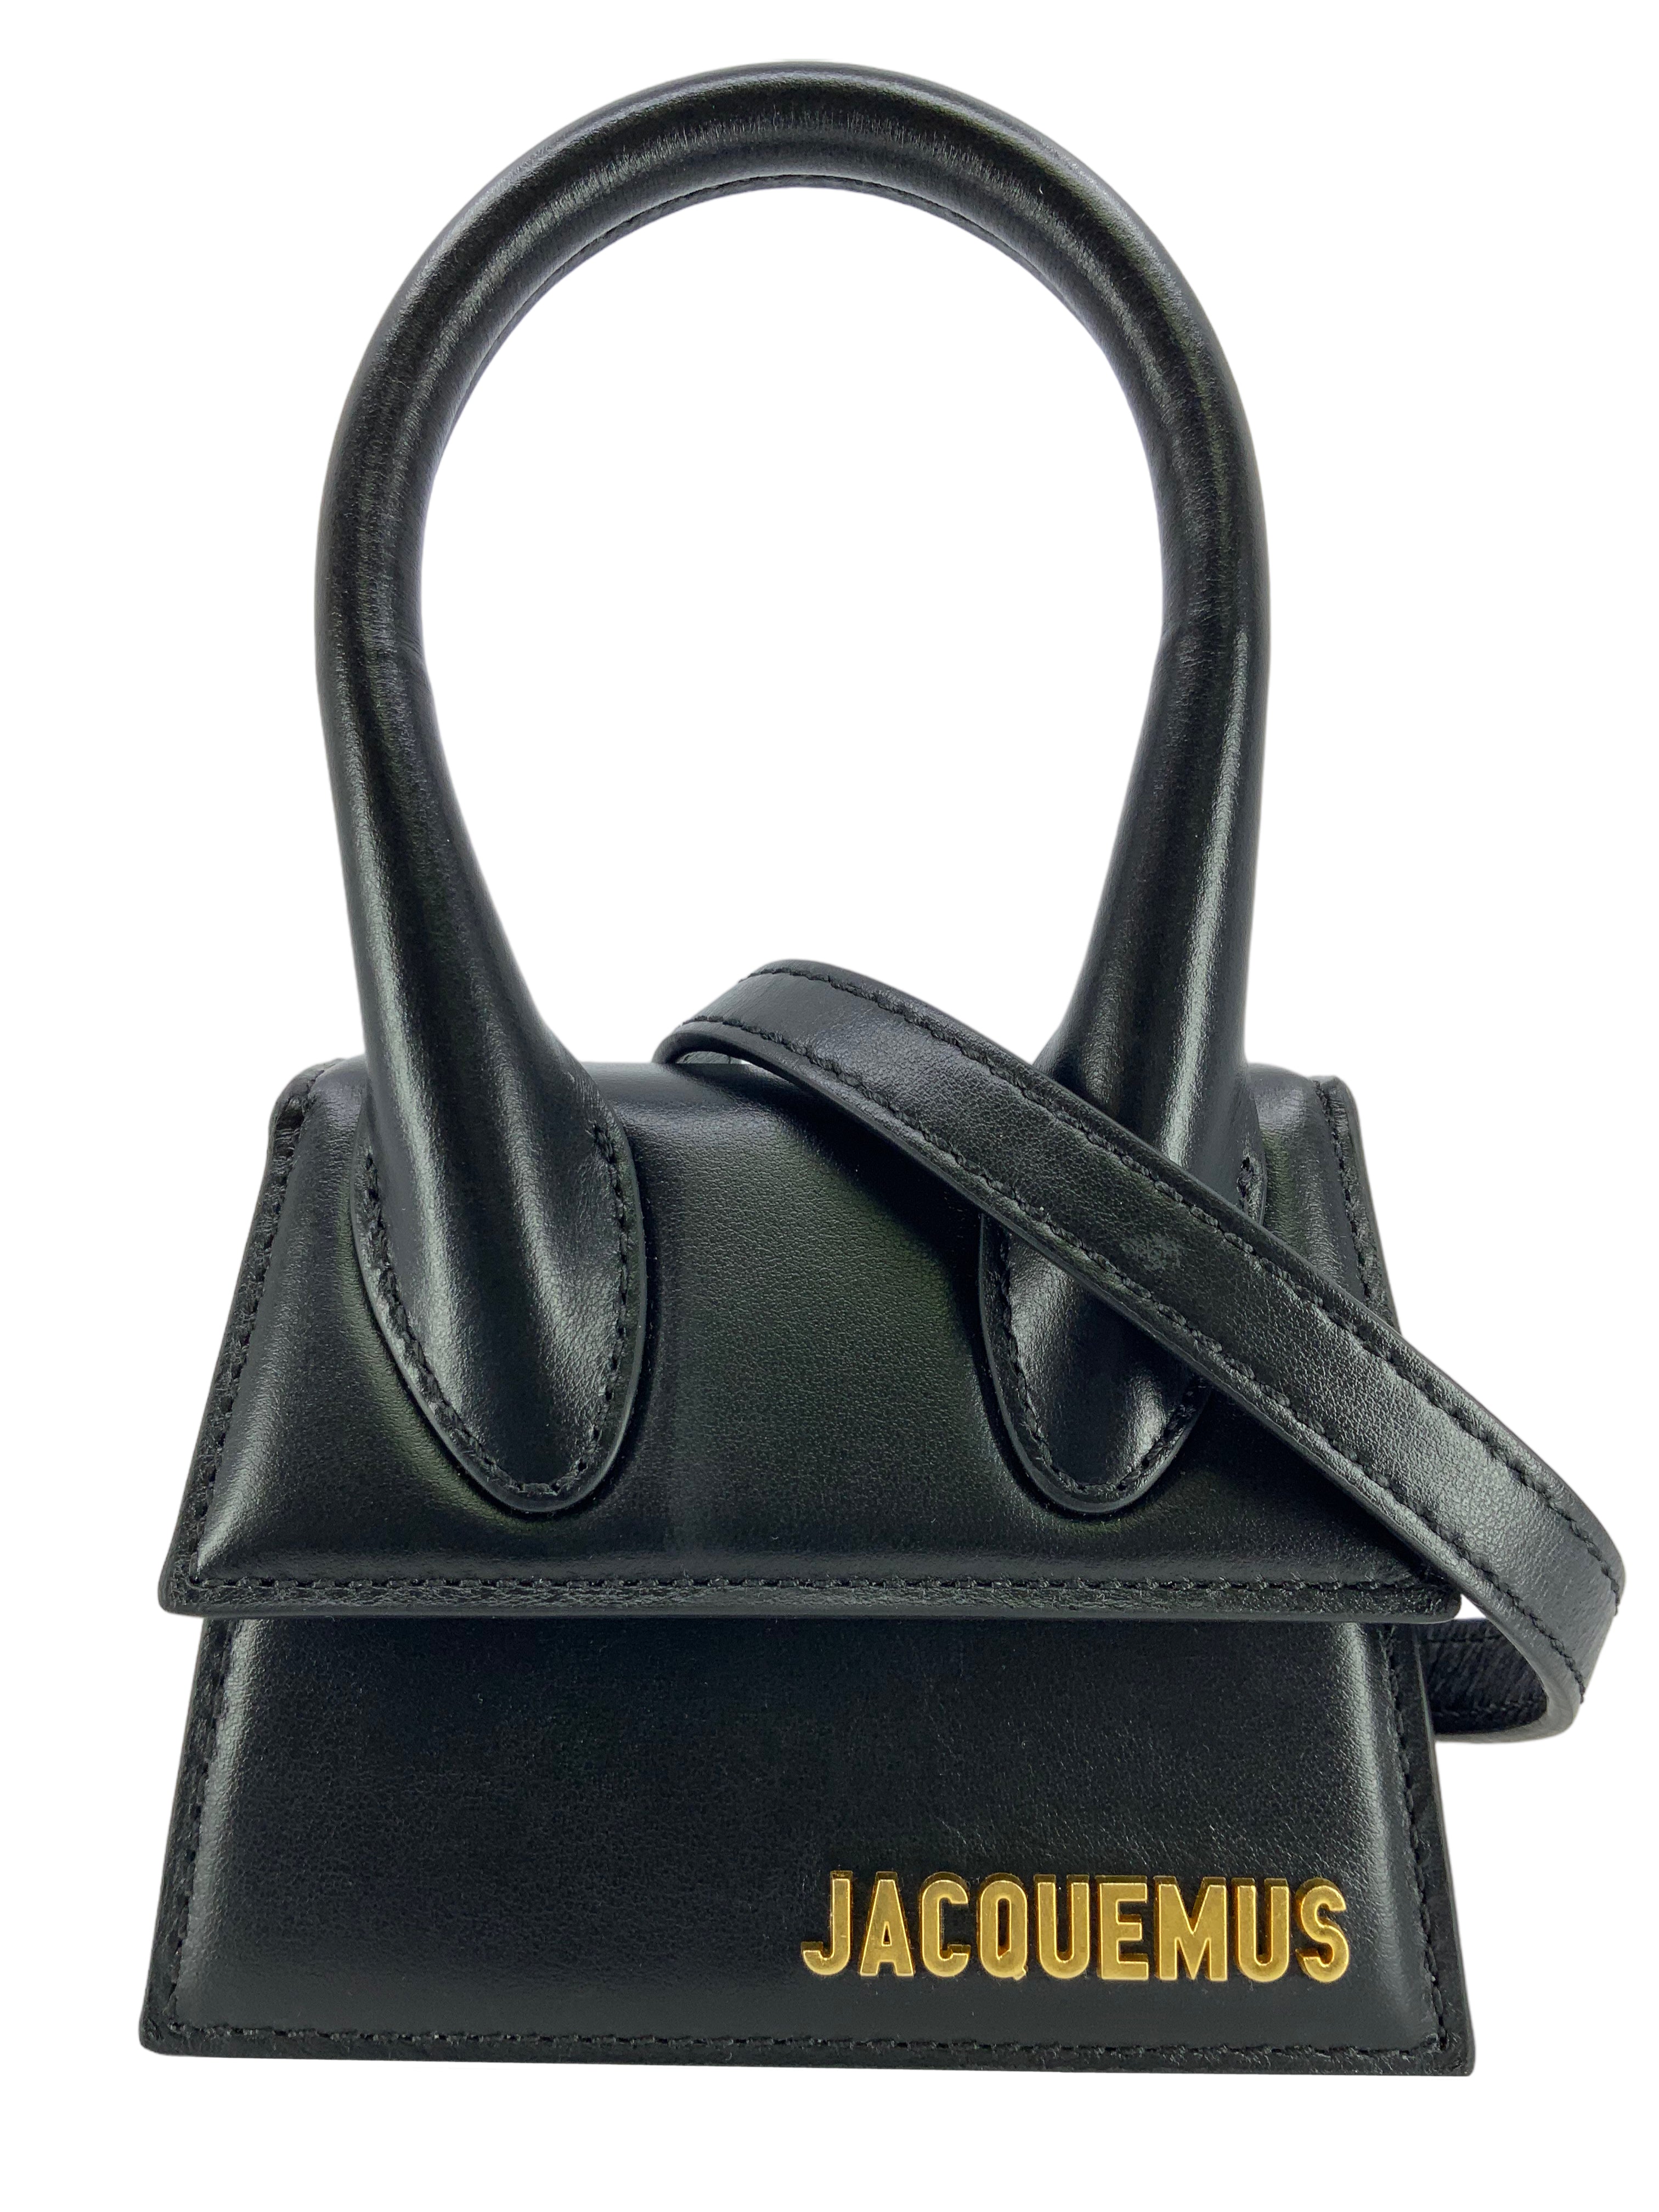 Jacquemus Le Chiquito Leather Bag in Black for Men